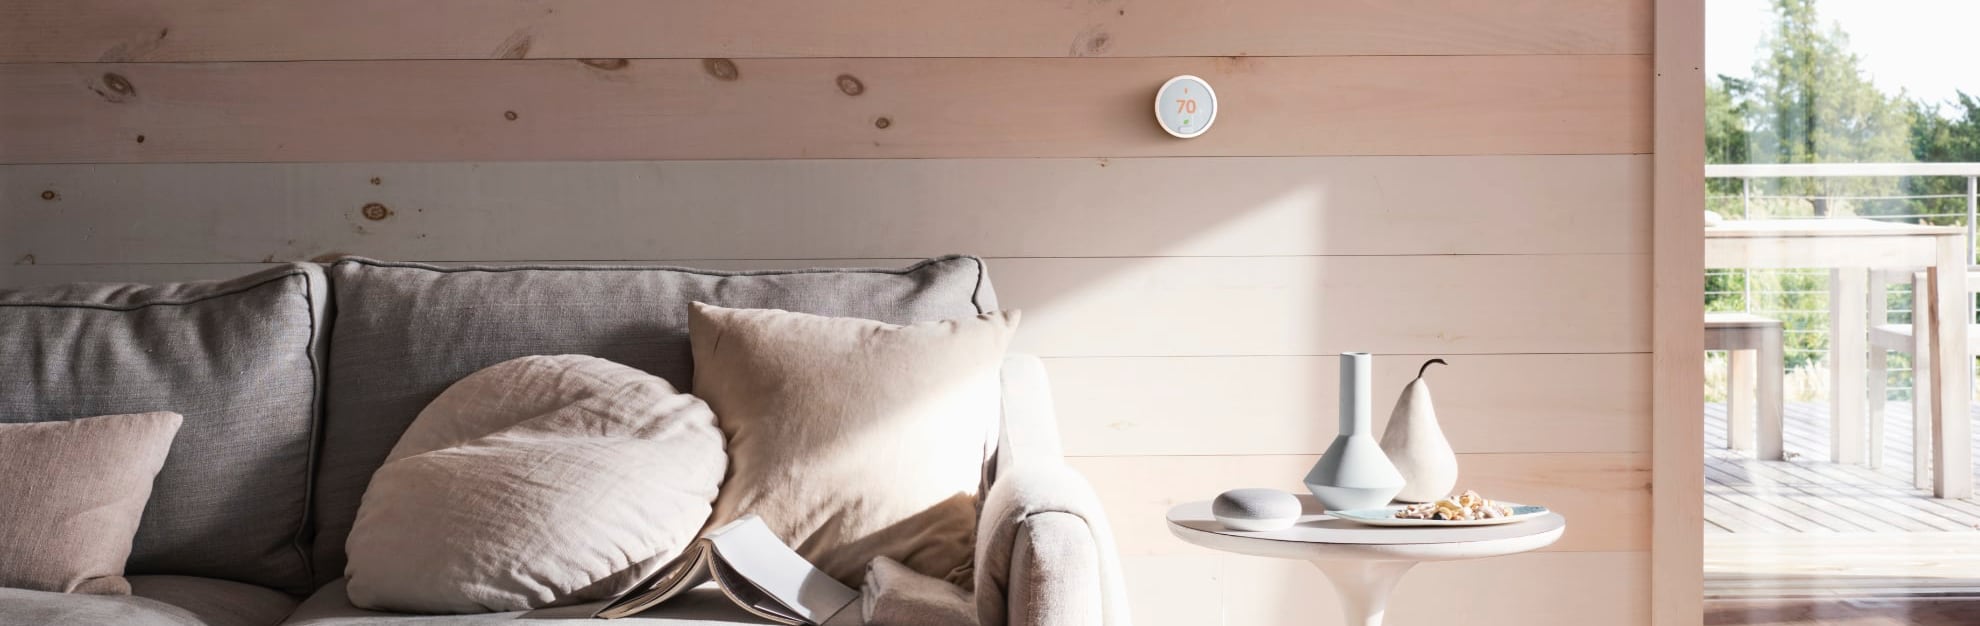 Vivint Home Automation in Utica